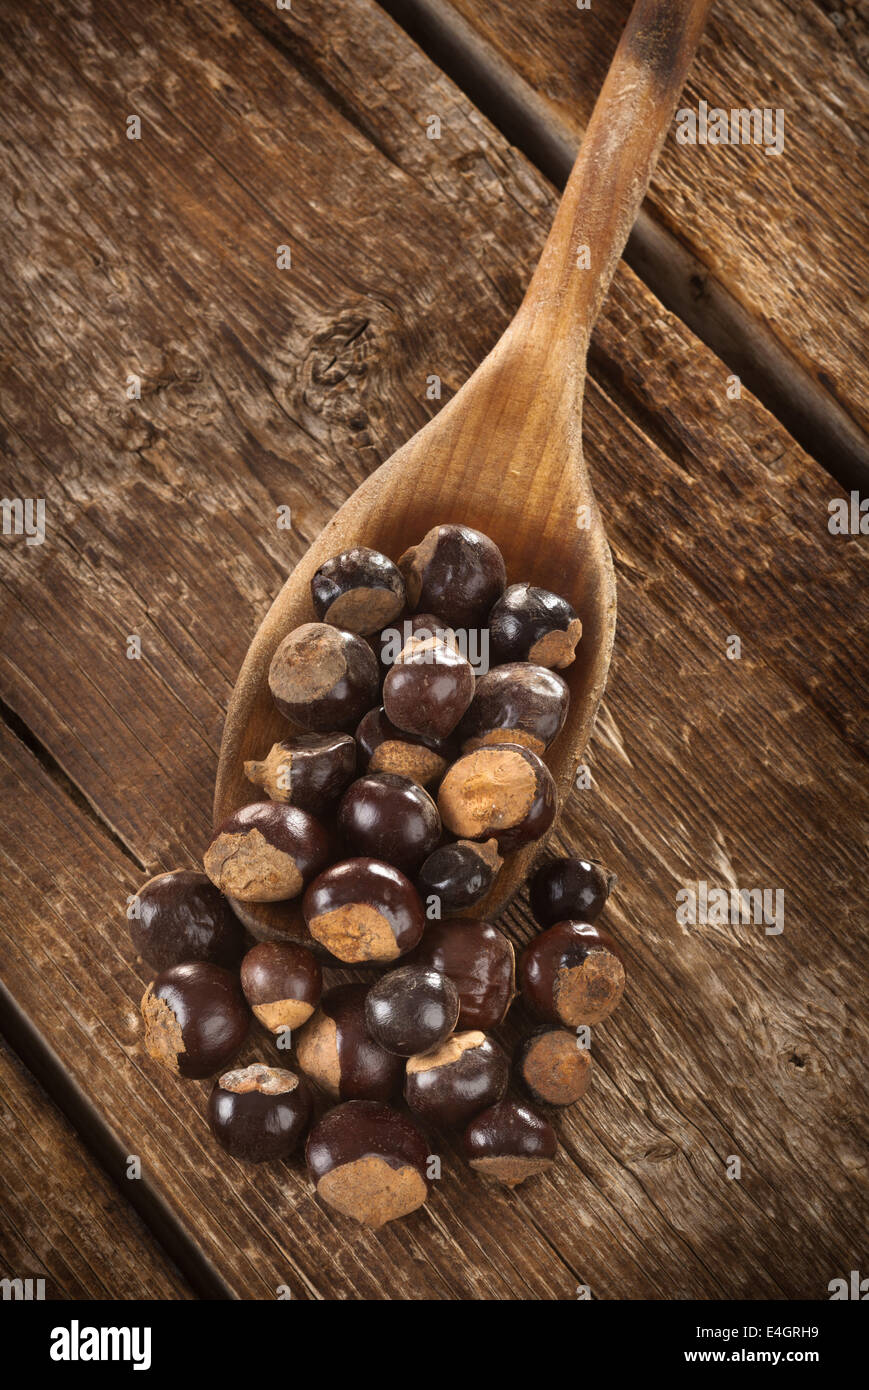 Guarana seeds on wooden table photographed with studio lighting Stock Photo